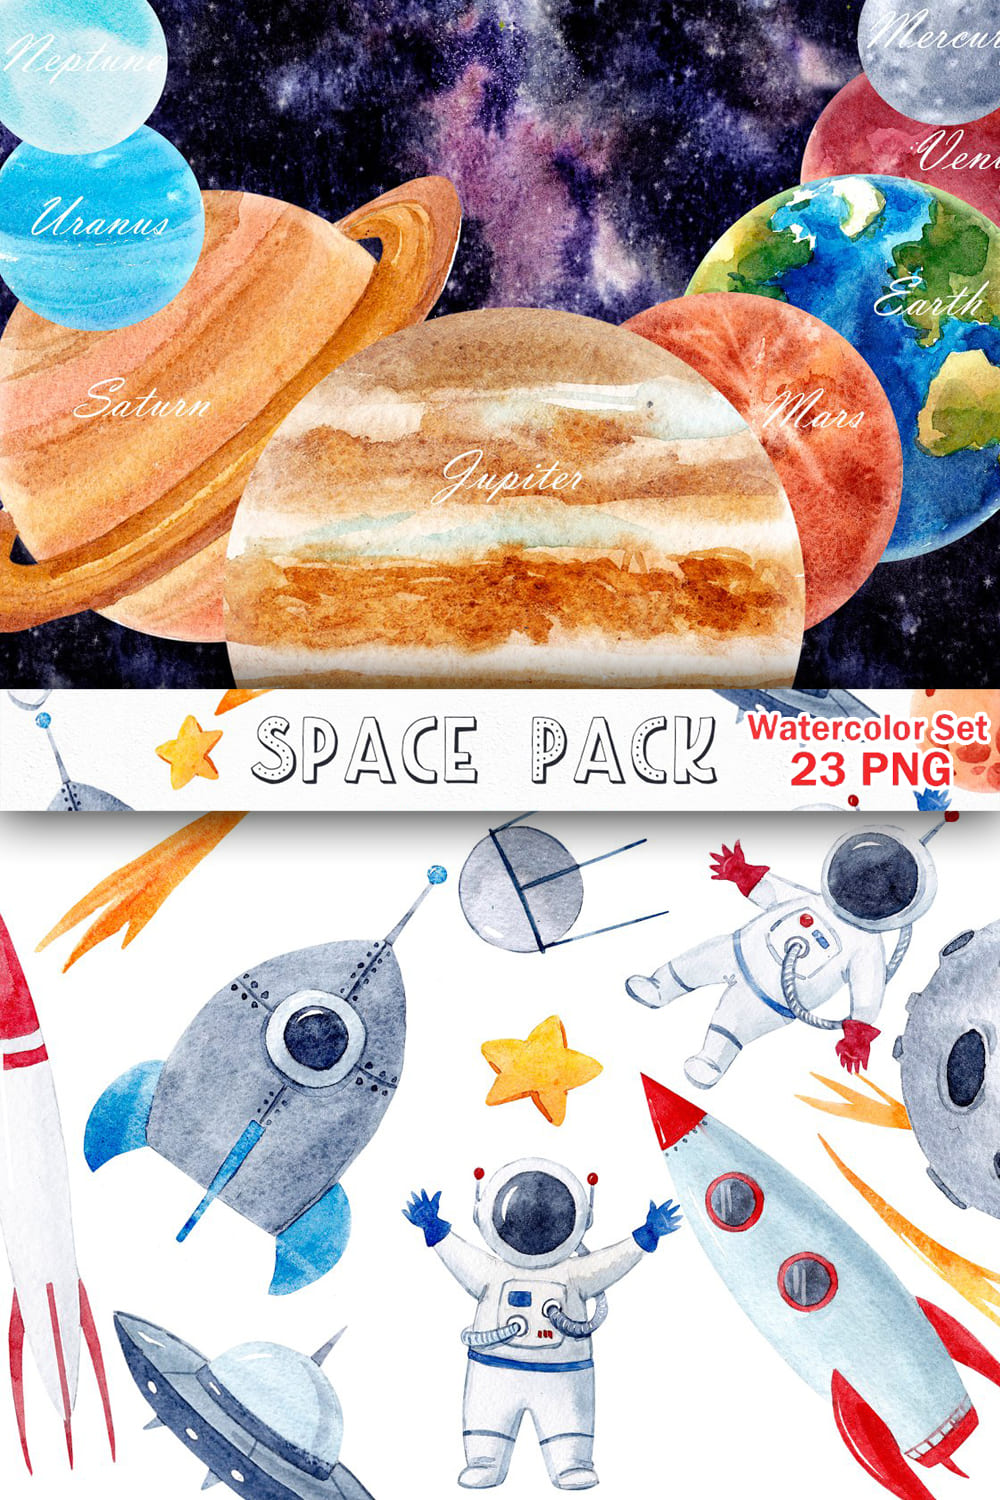 watWatercolor Space Pack PNG pinterest image.ercolor space pack png pinterest.